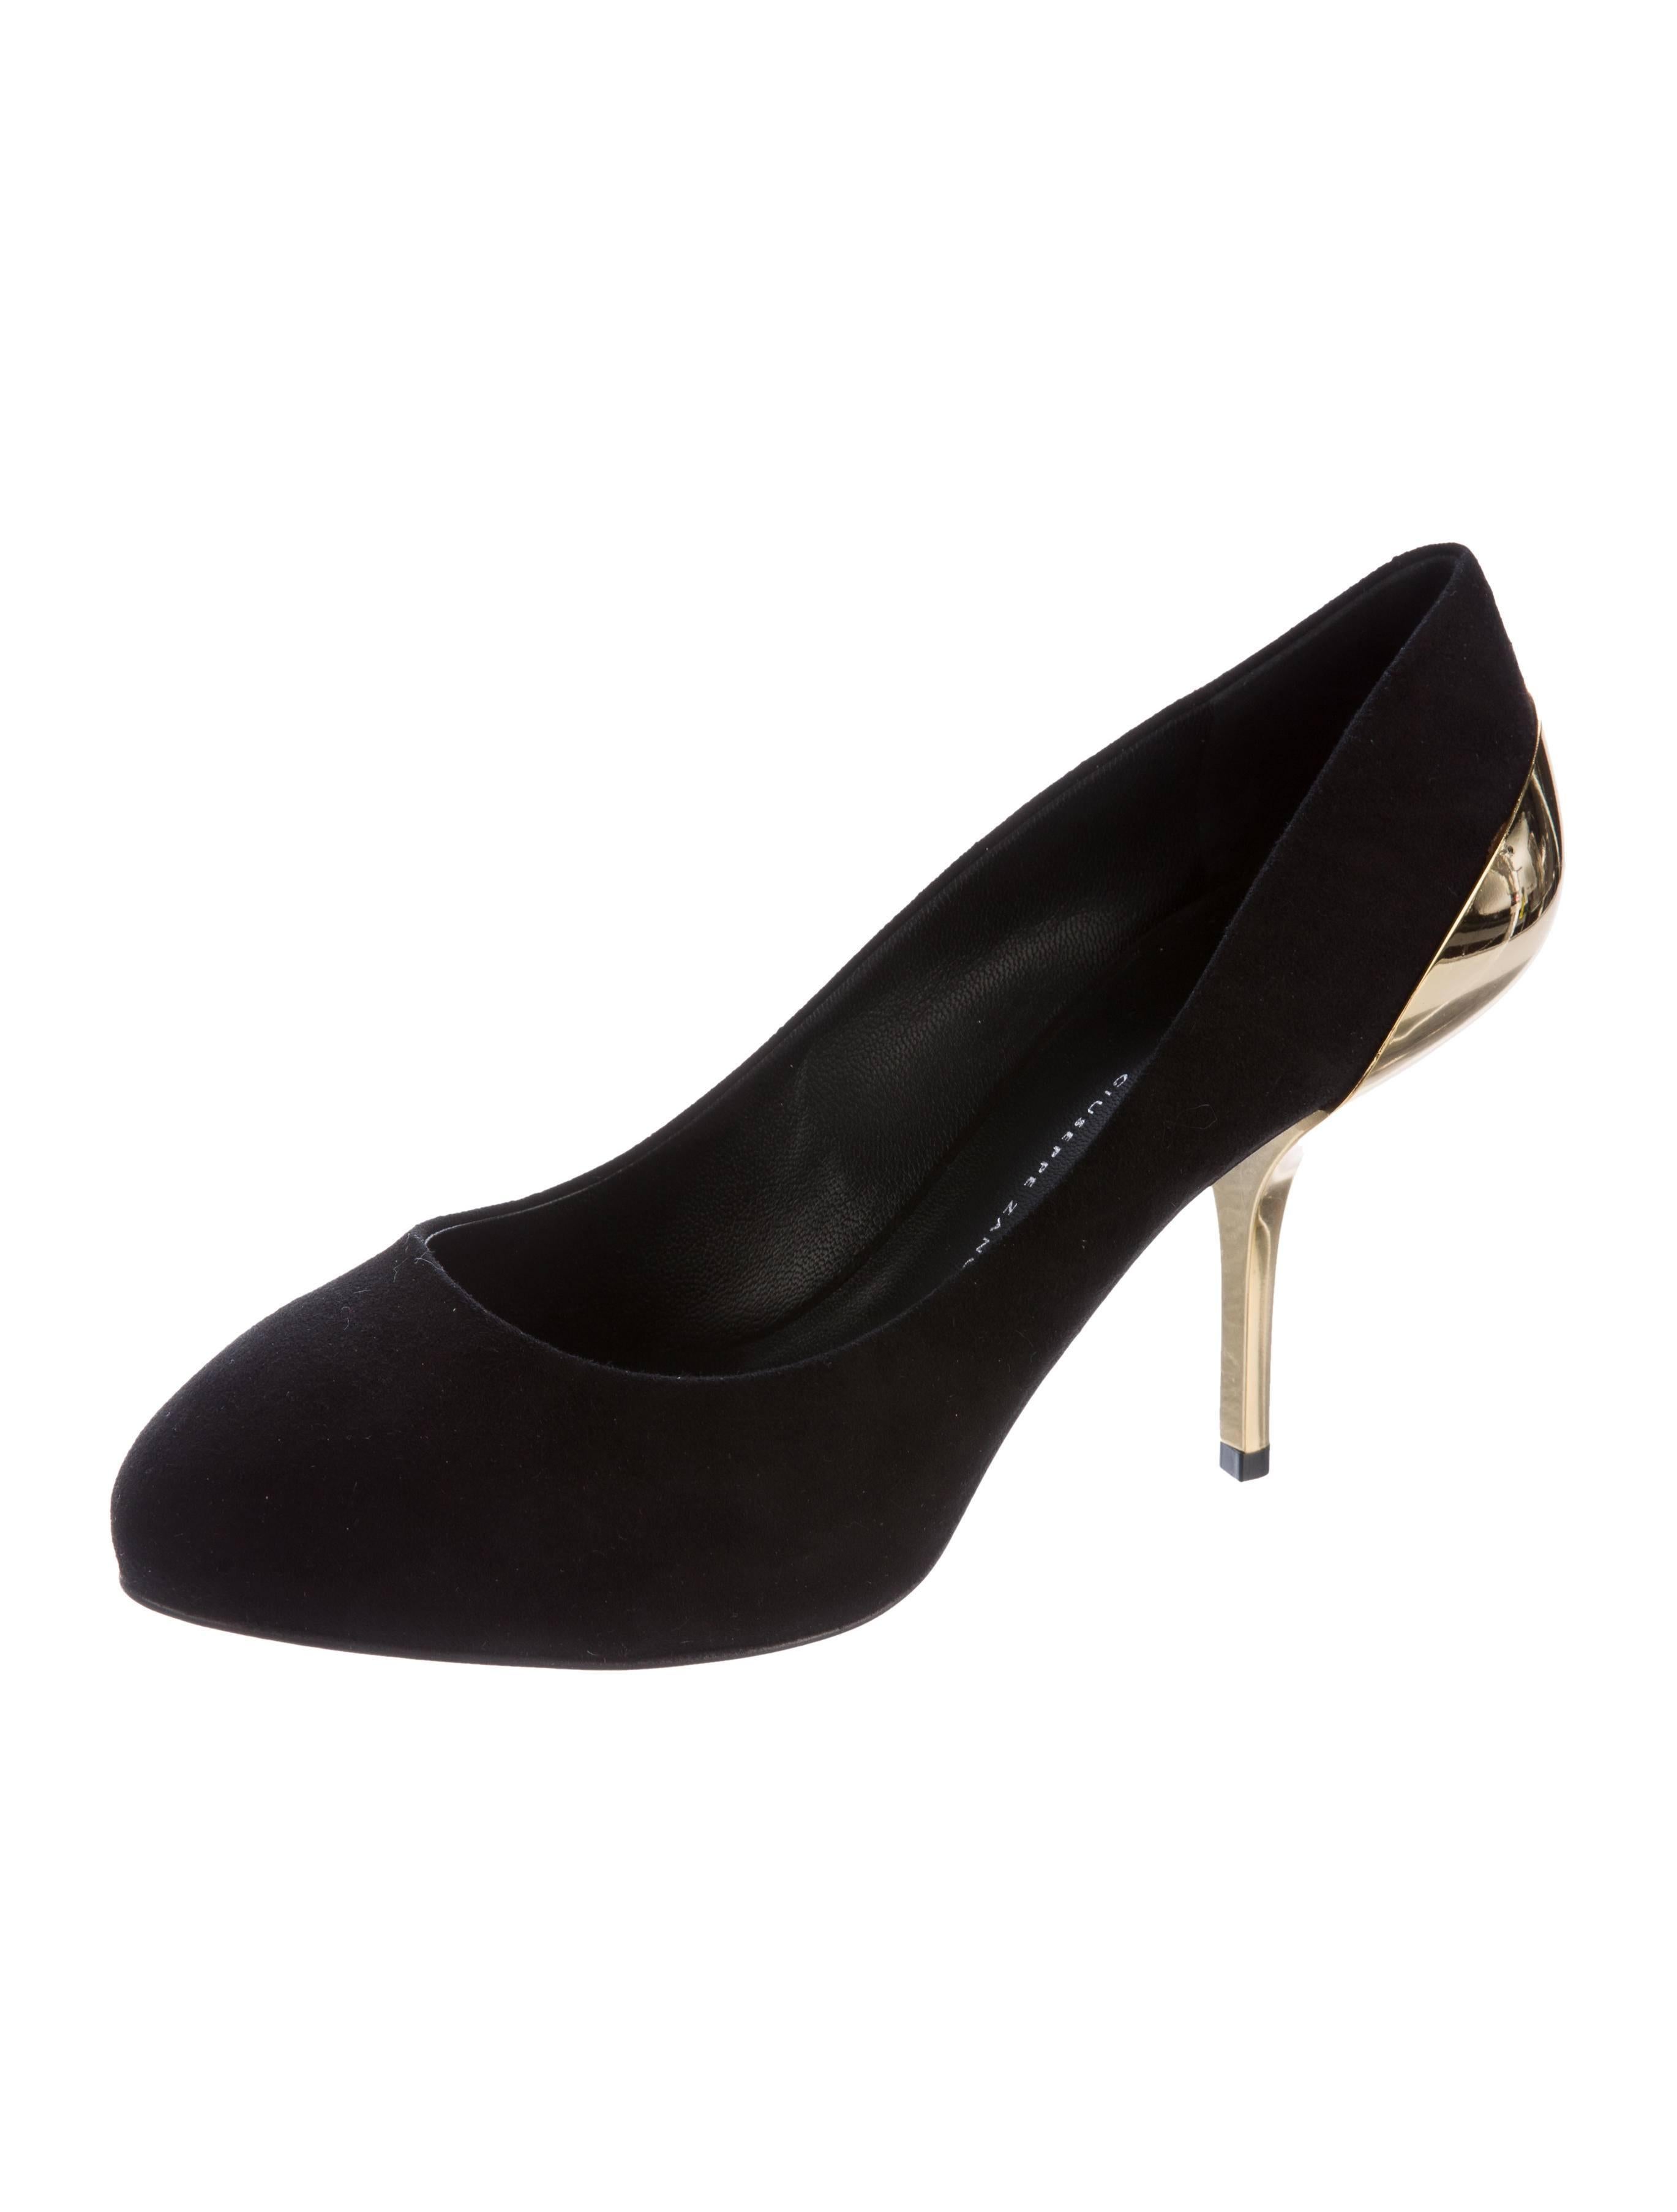 CURATOR'S NOTES

Size IT 39
Suede 
Metal
Gold tone
Heel height 4.5"
Includes original Giuseppe Zanotti dust bag and box
